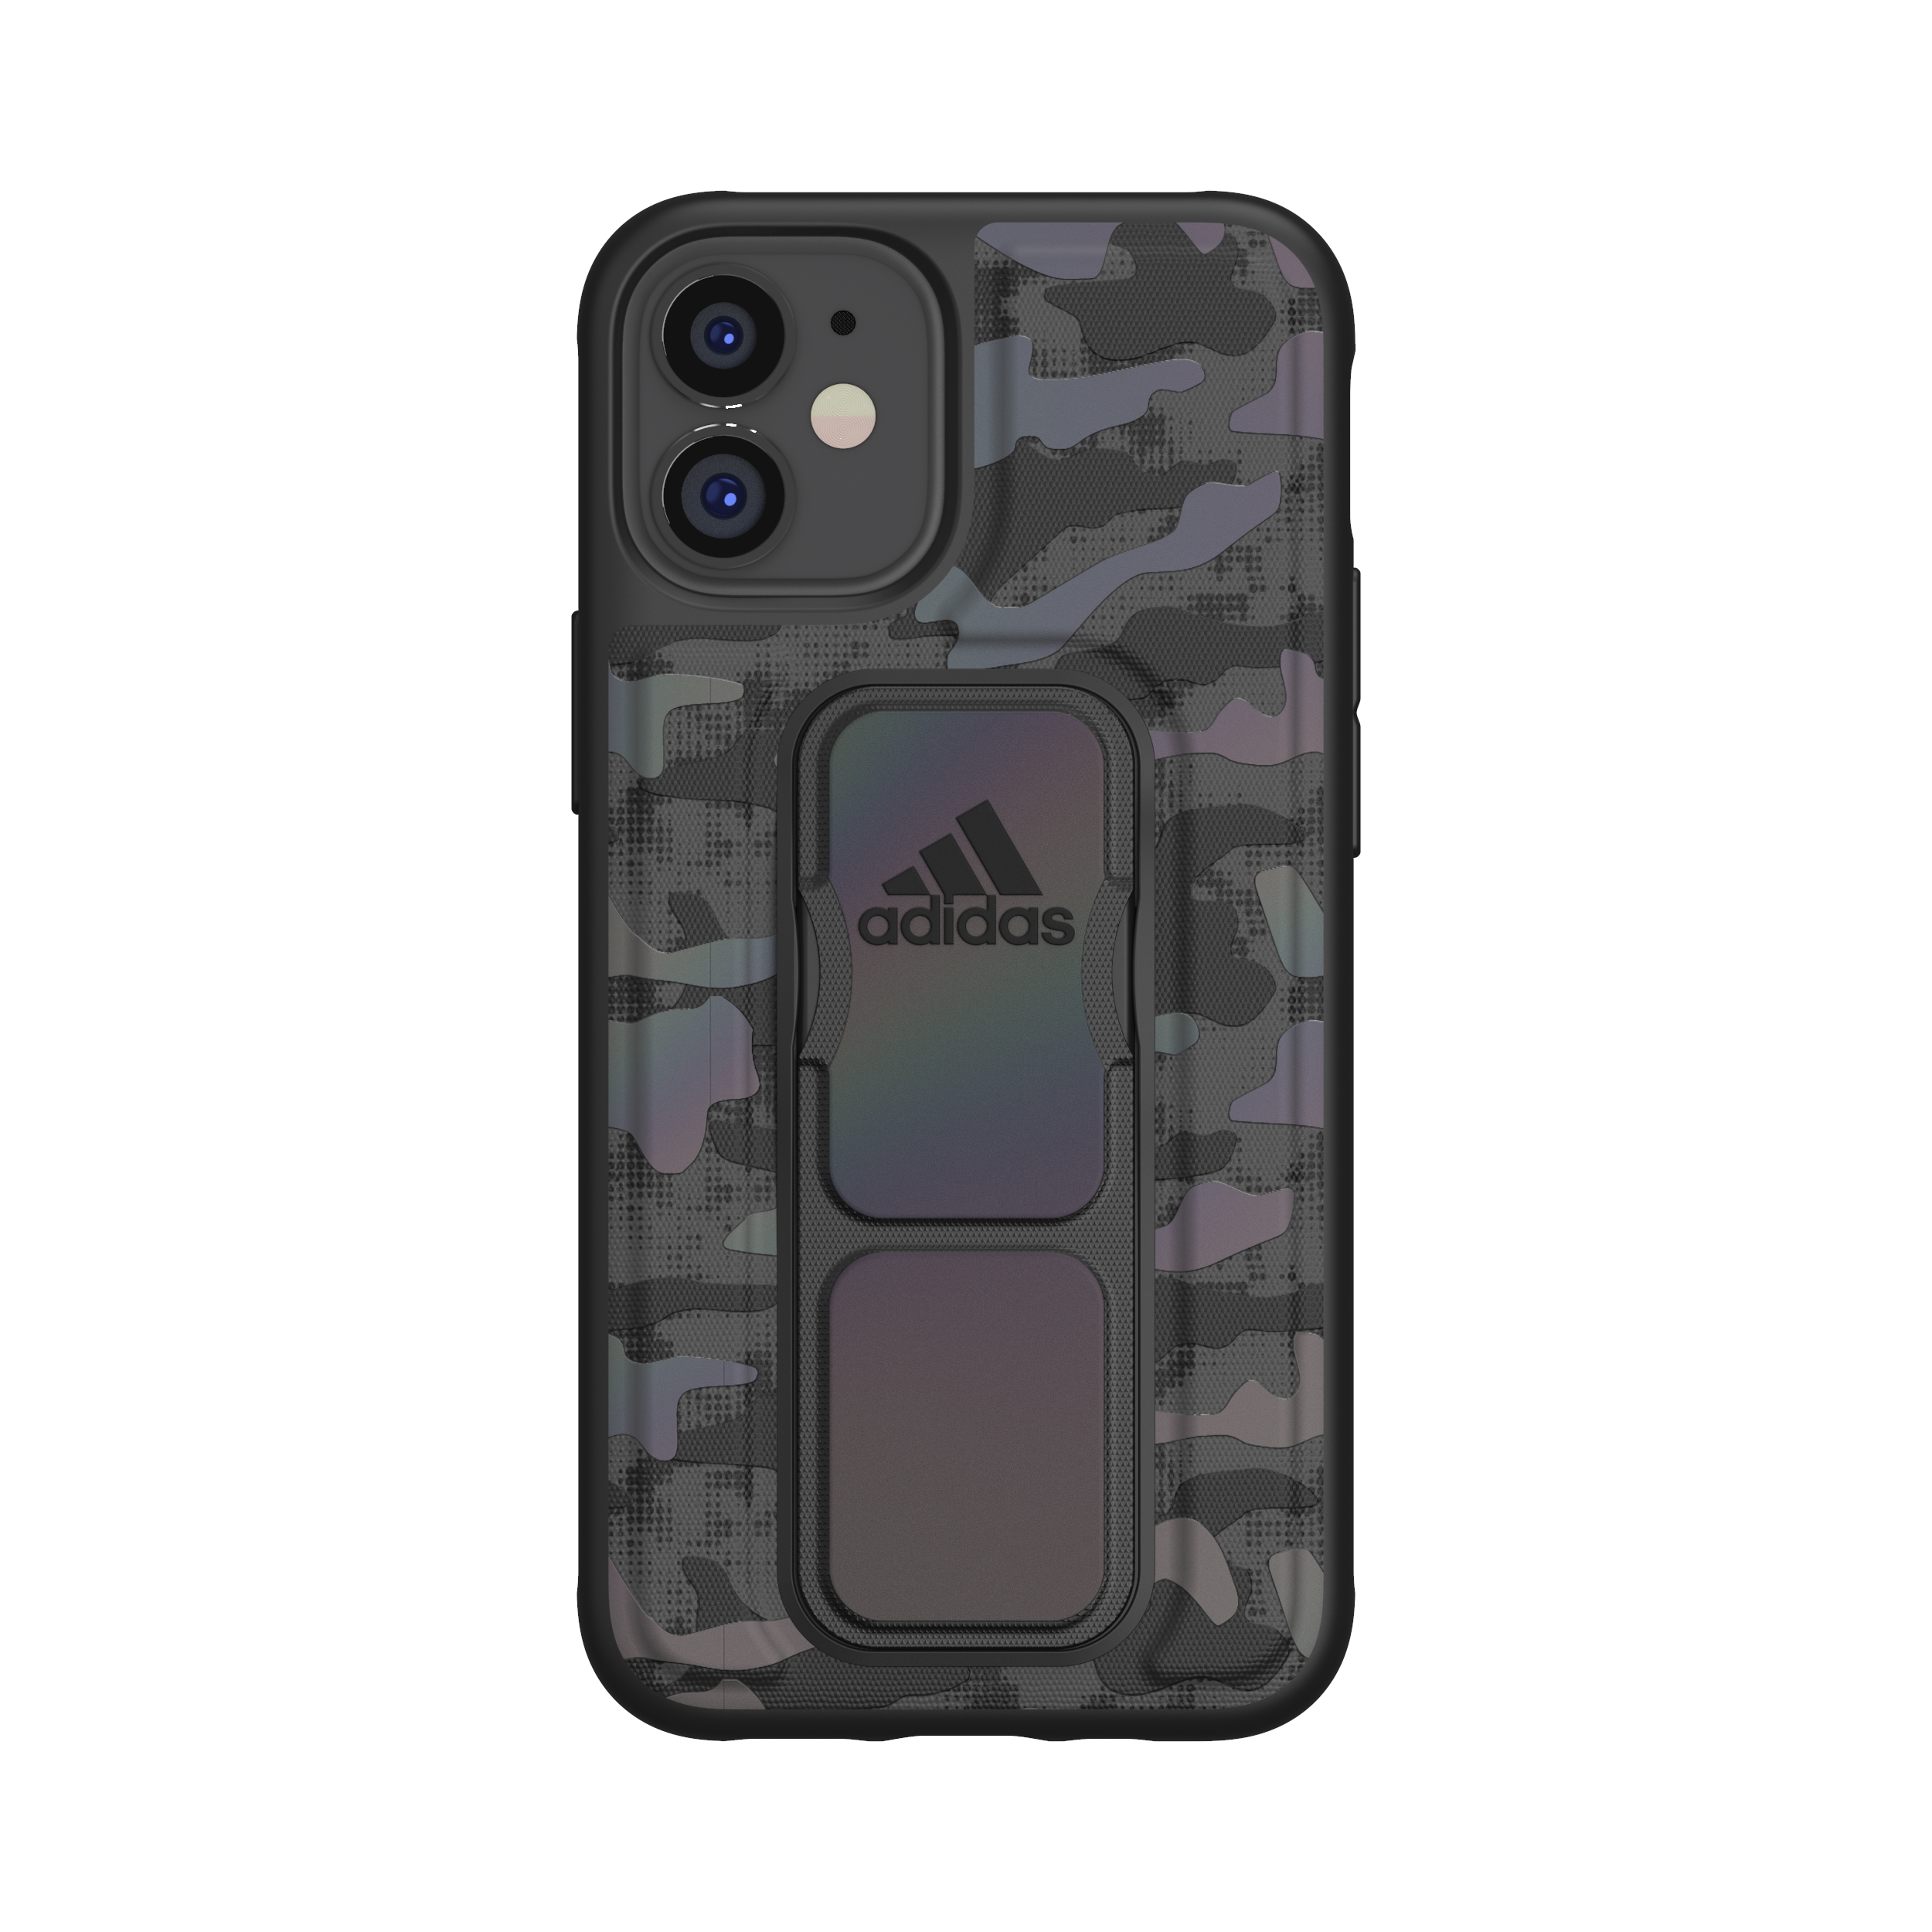 adidas SPORT Apple iPhone 12 Mini Camo Grip Case - Back cover w/ Grip or Stand, Scratch & Drop Protection w/ TPU Bumper, Wireless Charging Compatible - Black